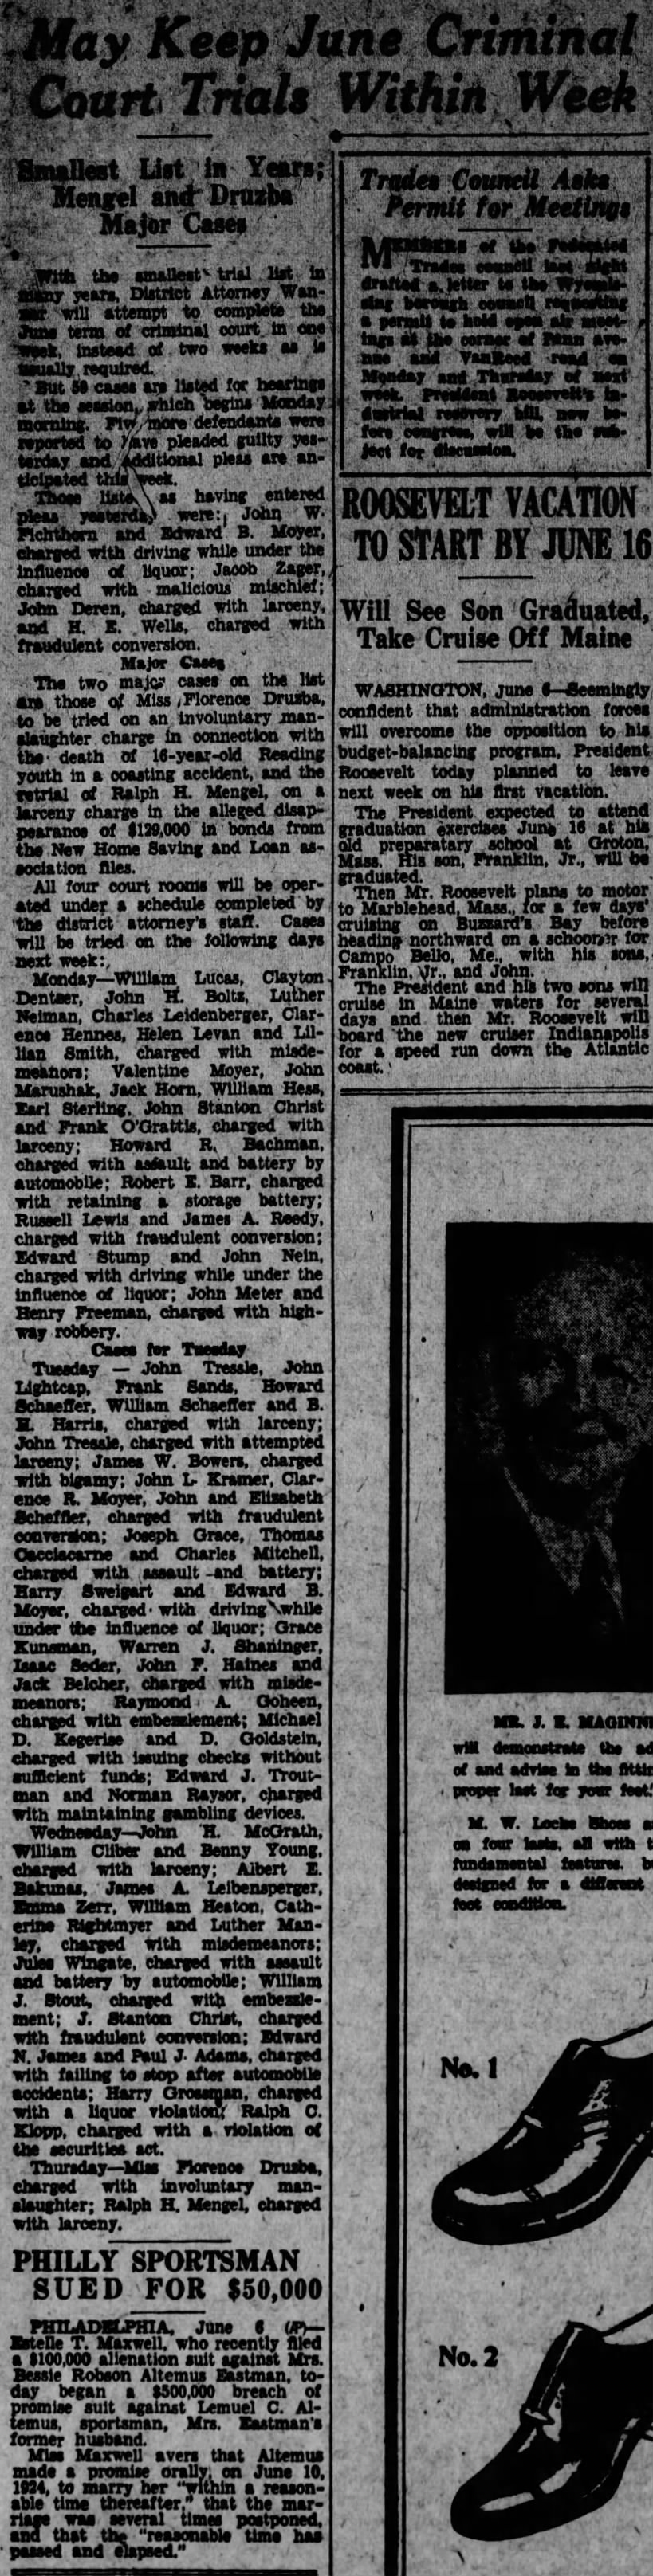 1933-06-07 - James William Bowers - Reading Times p 3 col 1 - Bigamy Charge